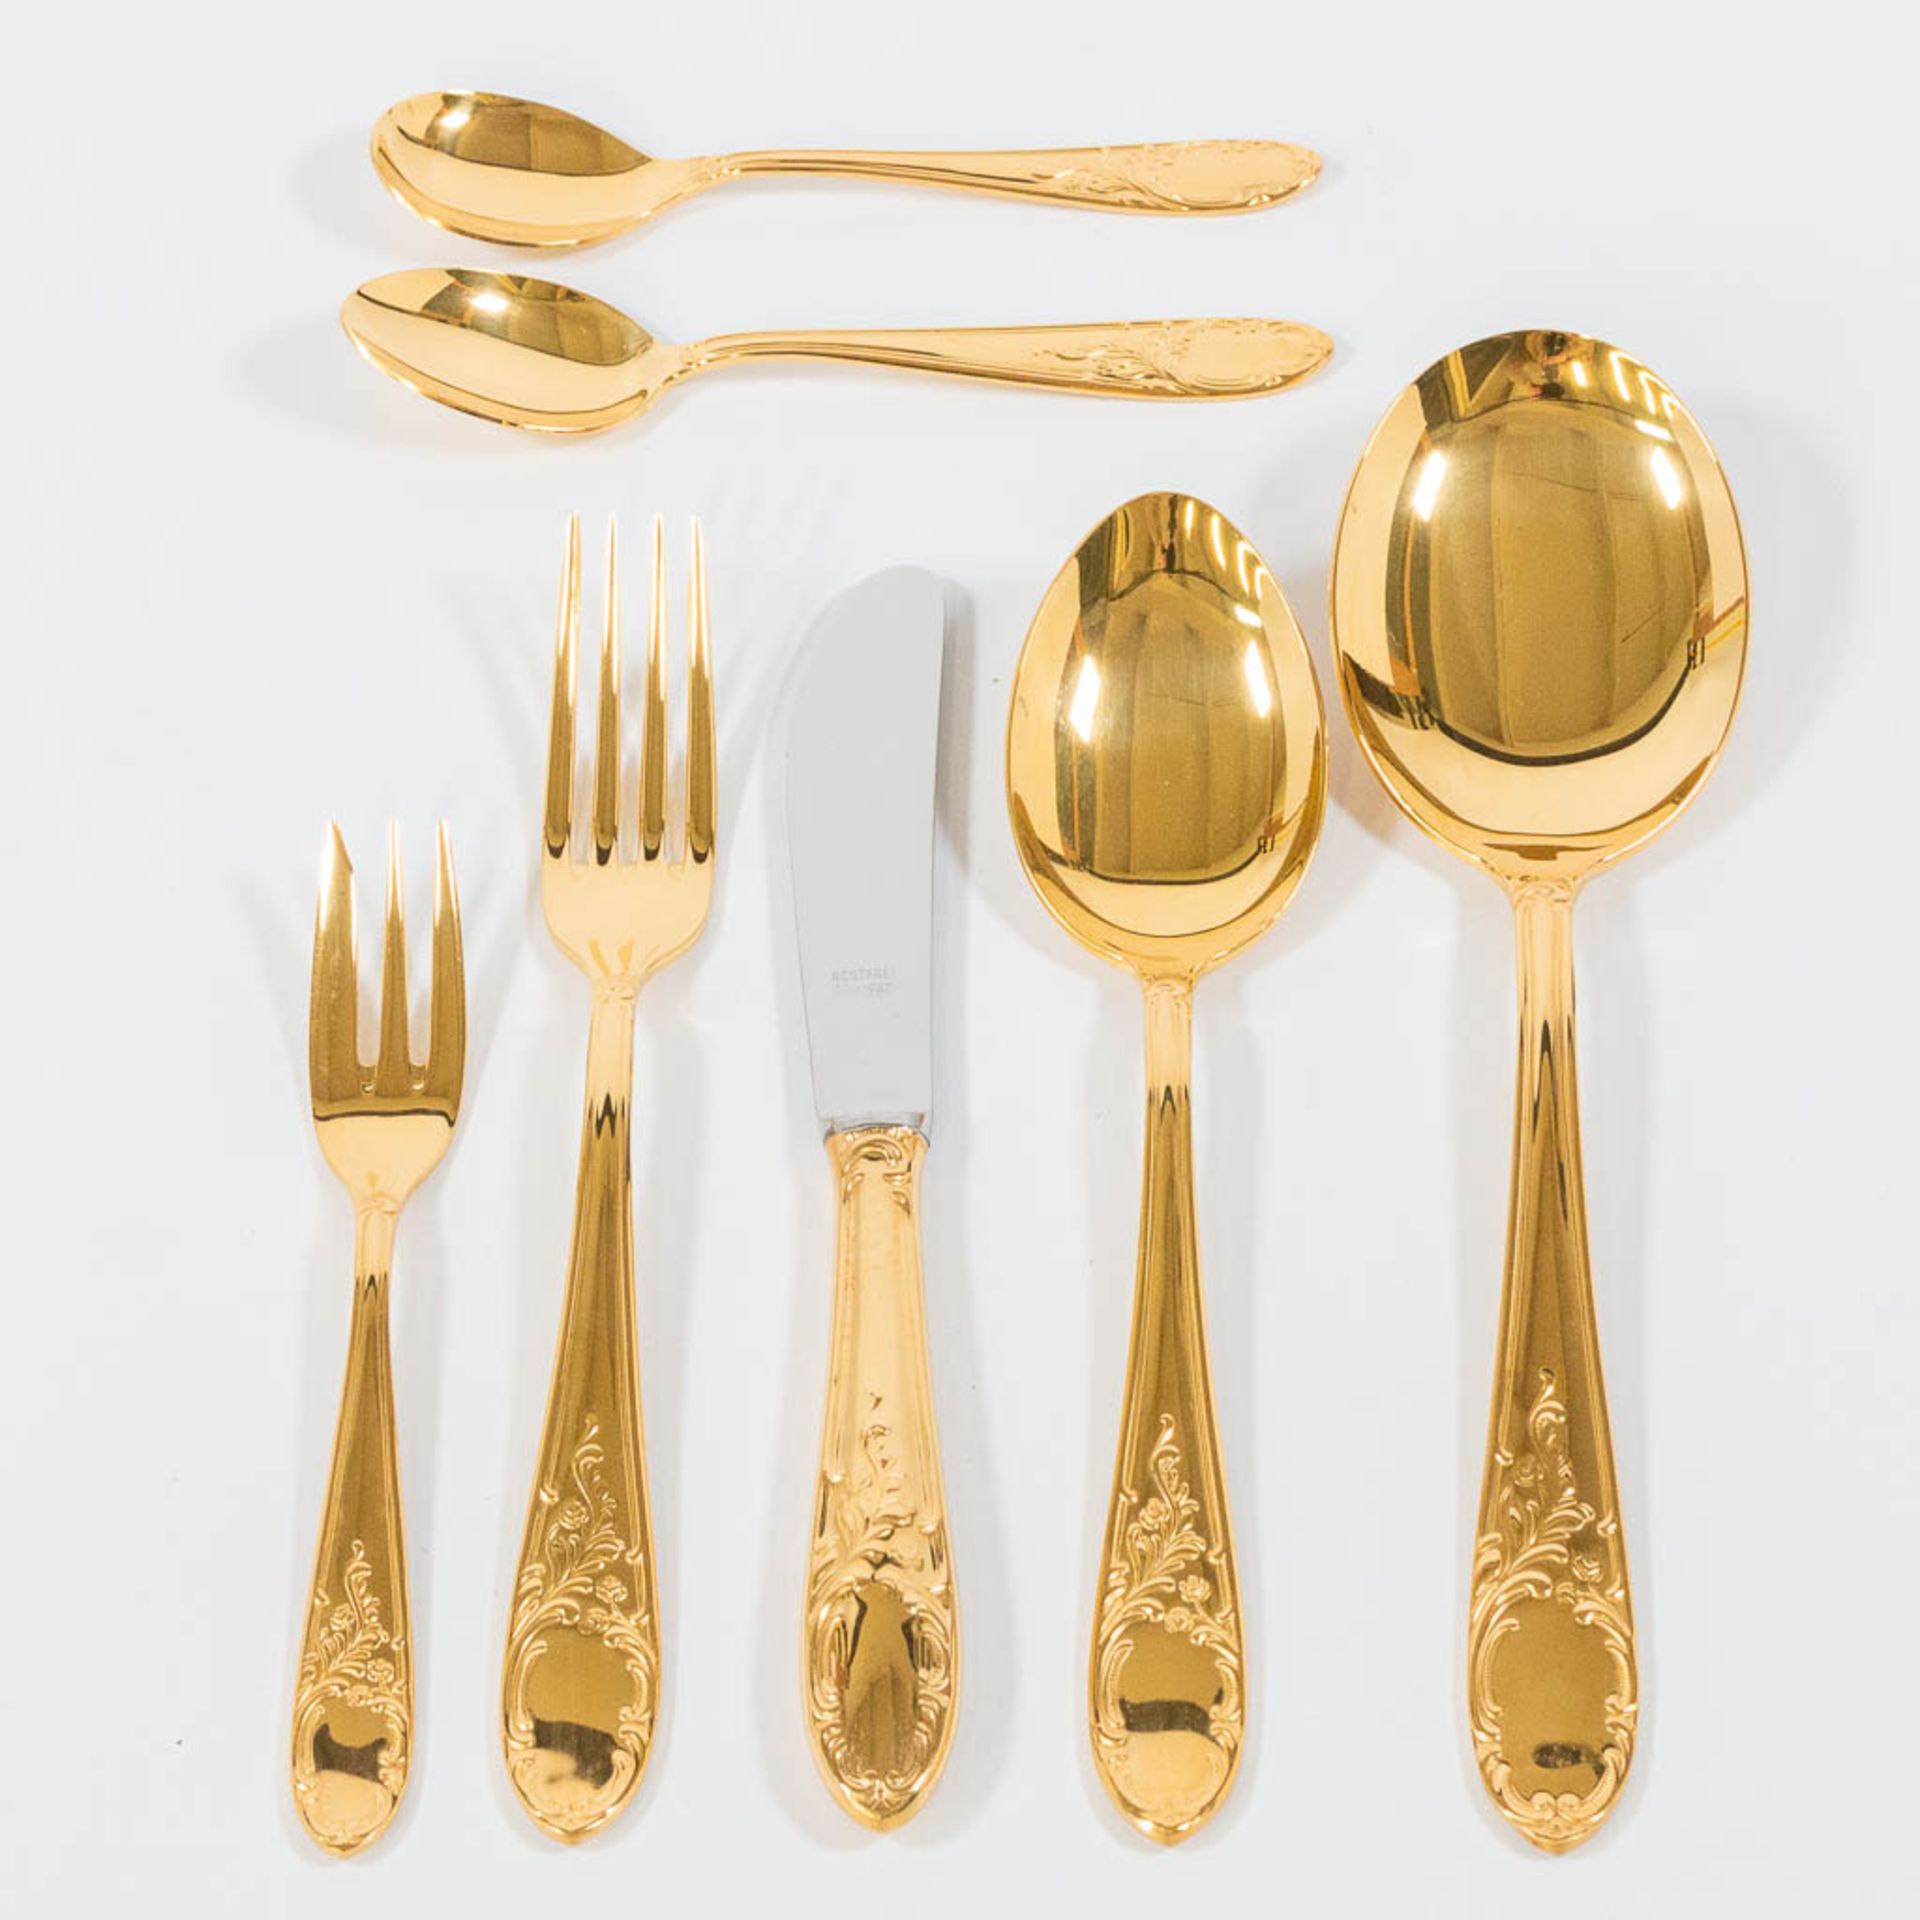 A gold-plated cuttlery set, made by Solingen in Germany. Inox 18/10 gold-plated 23 karat. - Bild 10 aus 23